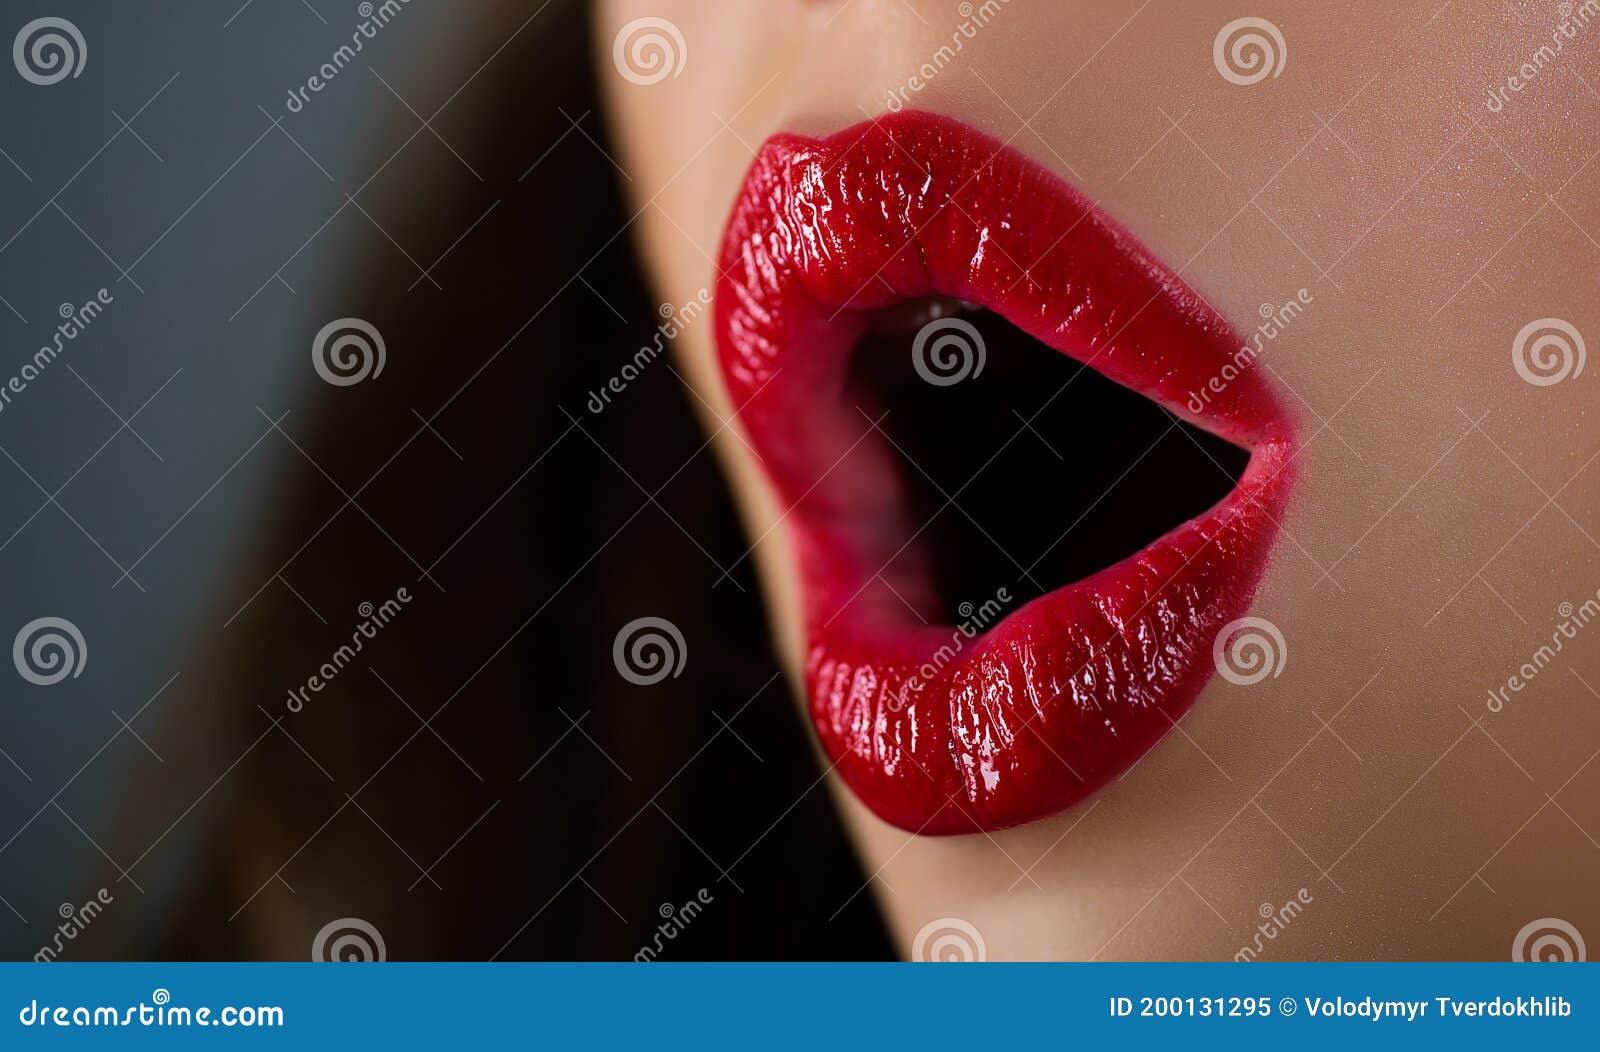 wow expression, open mouth, oral. art lips, awesome and surprising woman emotions, erotica. close up sexy lip.